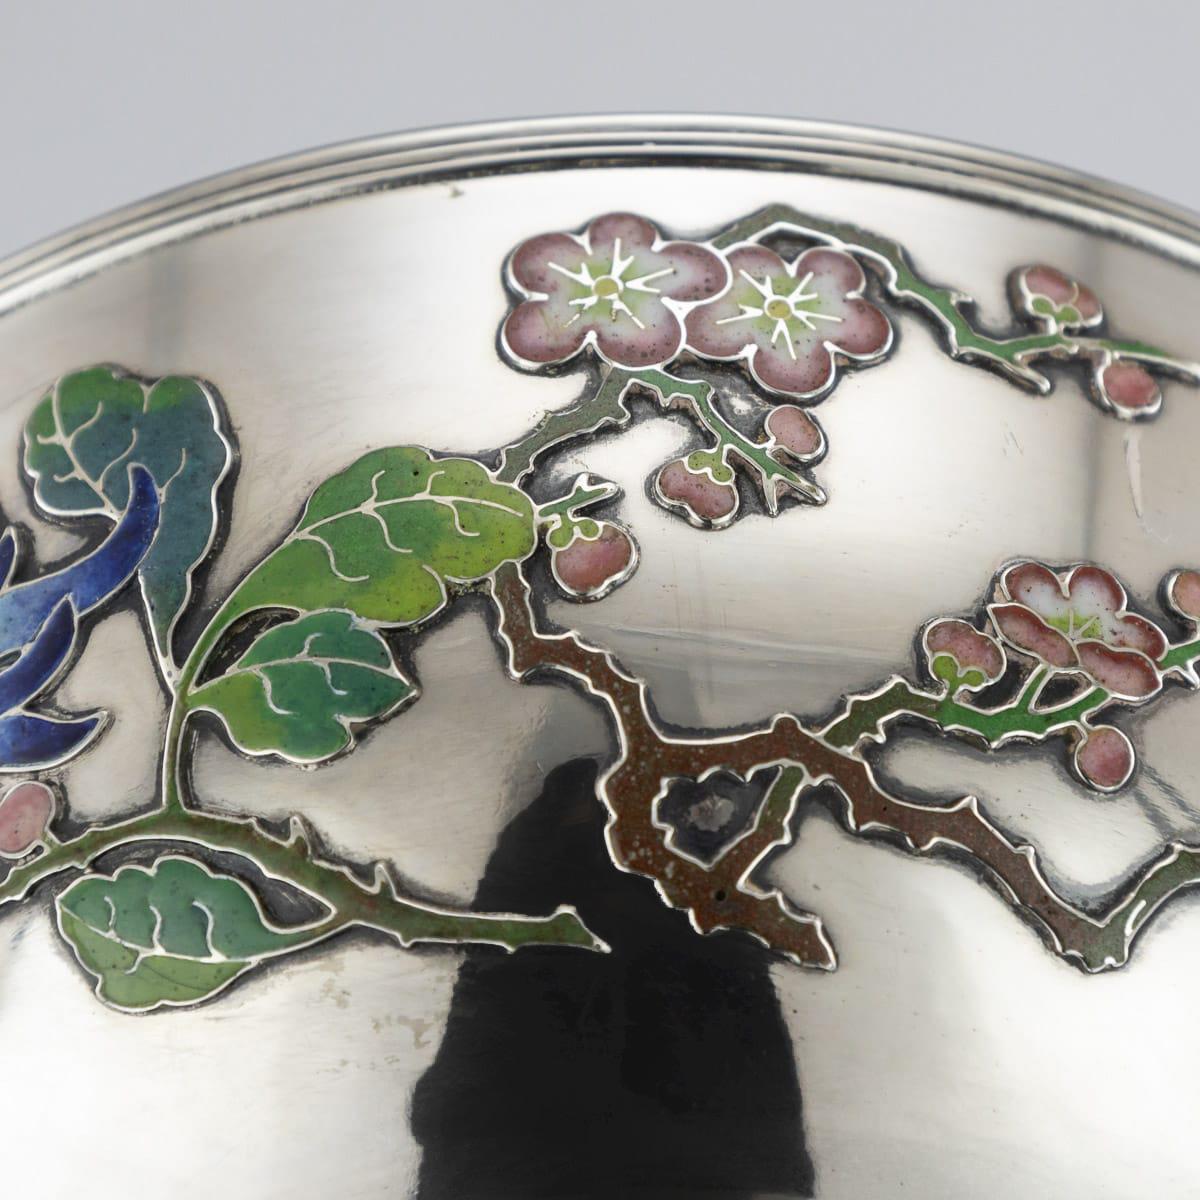 19th Century Rare Chinese Export Solid Silver & Enamel Bowl, Wo Kwong circa 1890 For Sale 5